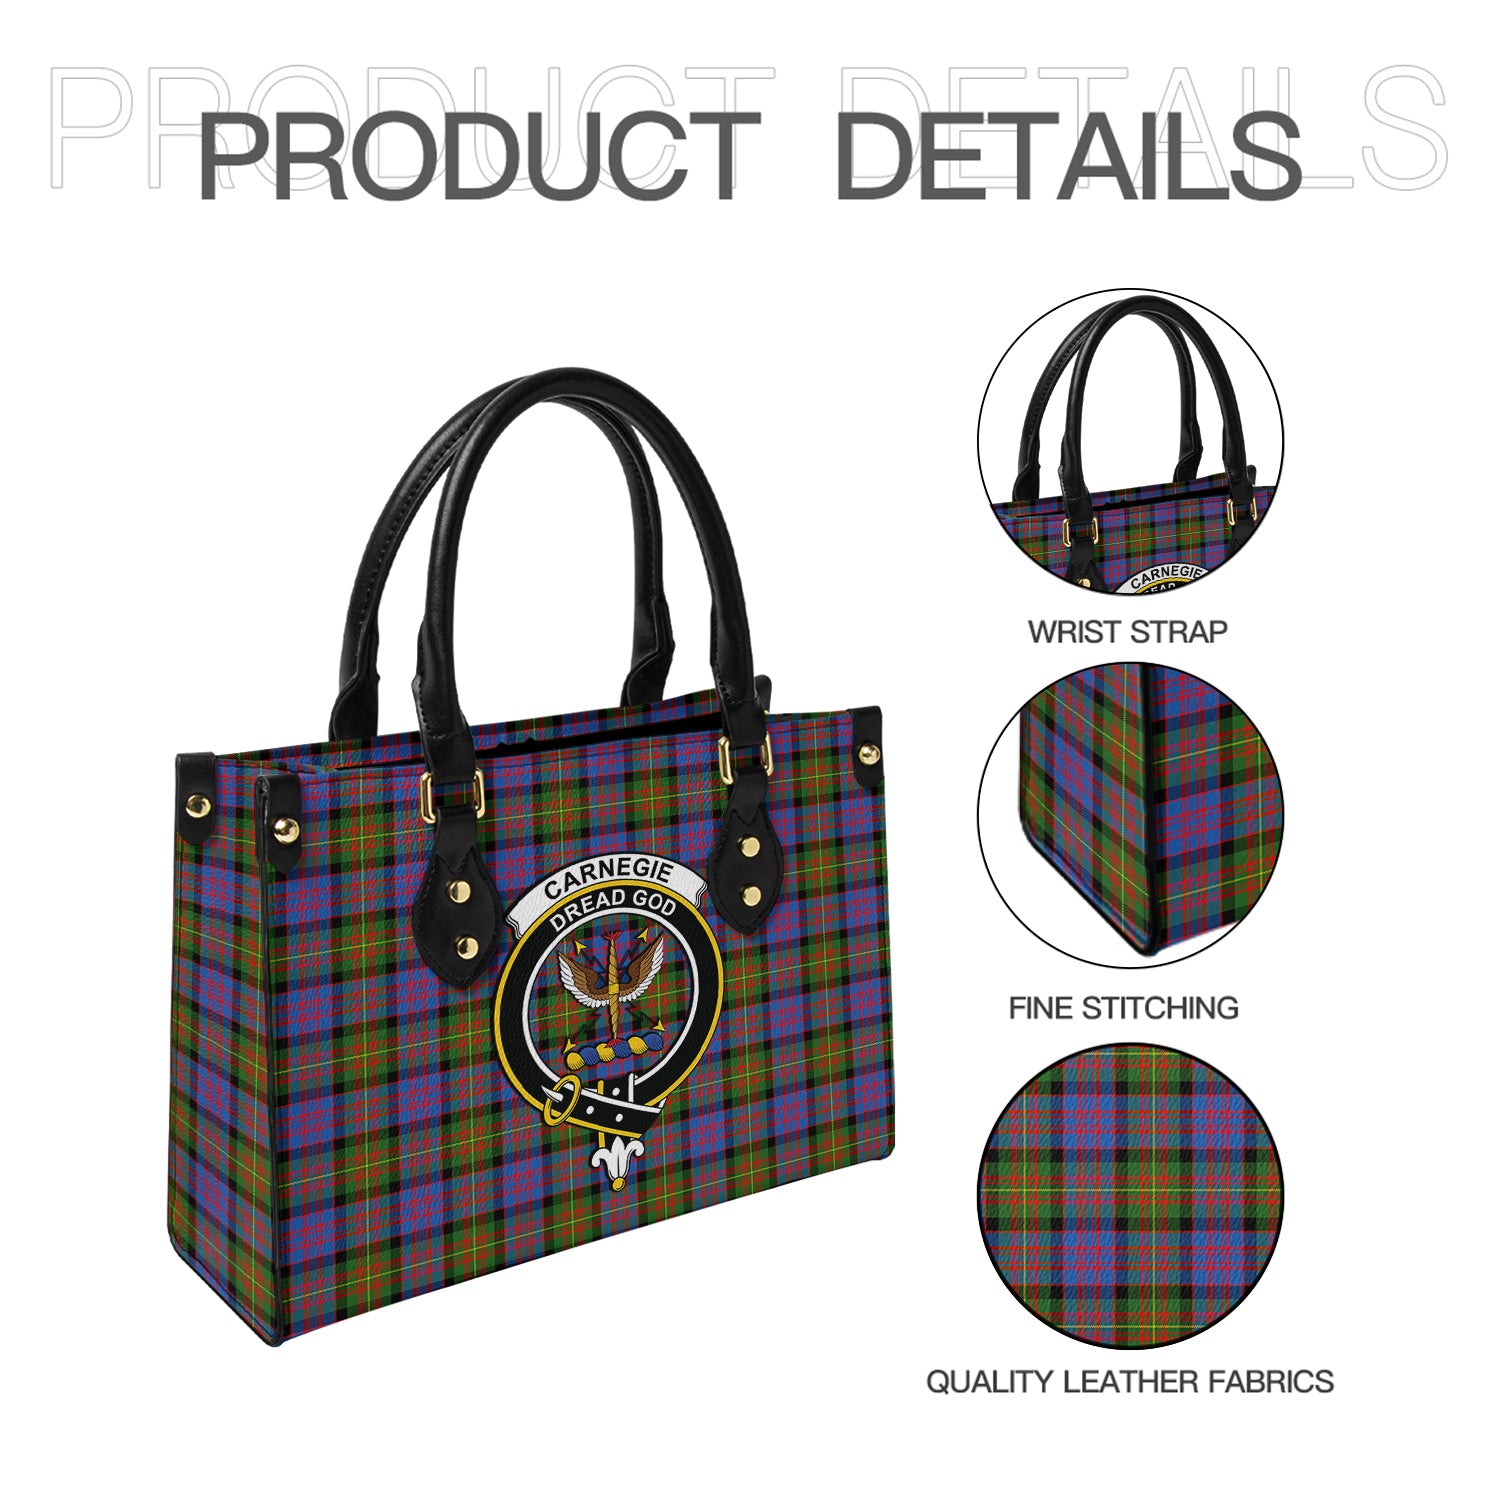 carnegie-ancient-tartan-leather-bag-with-family-crest